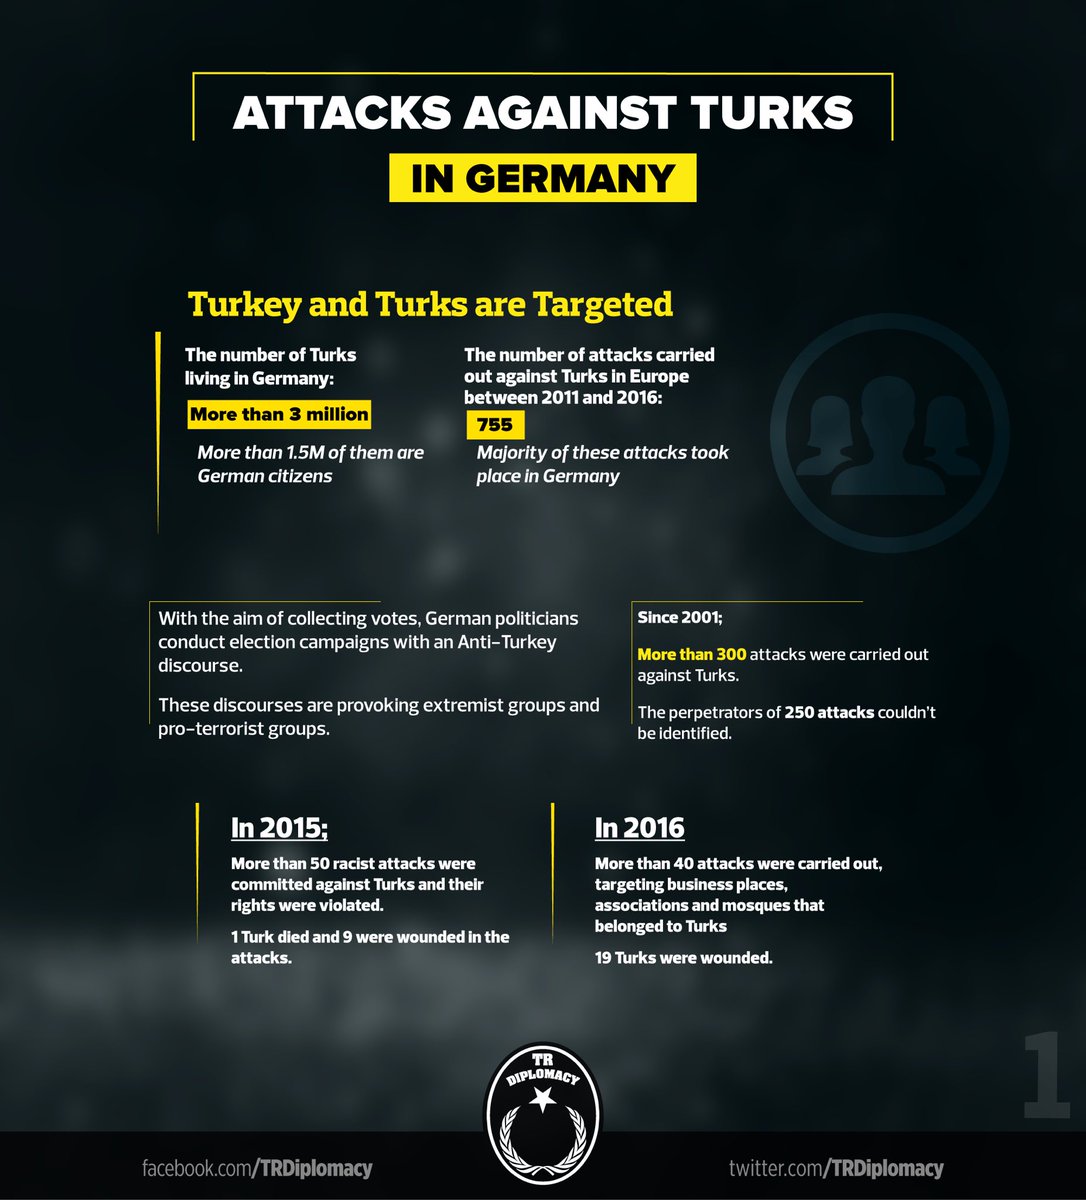 Attacks against Turks in Germany